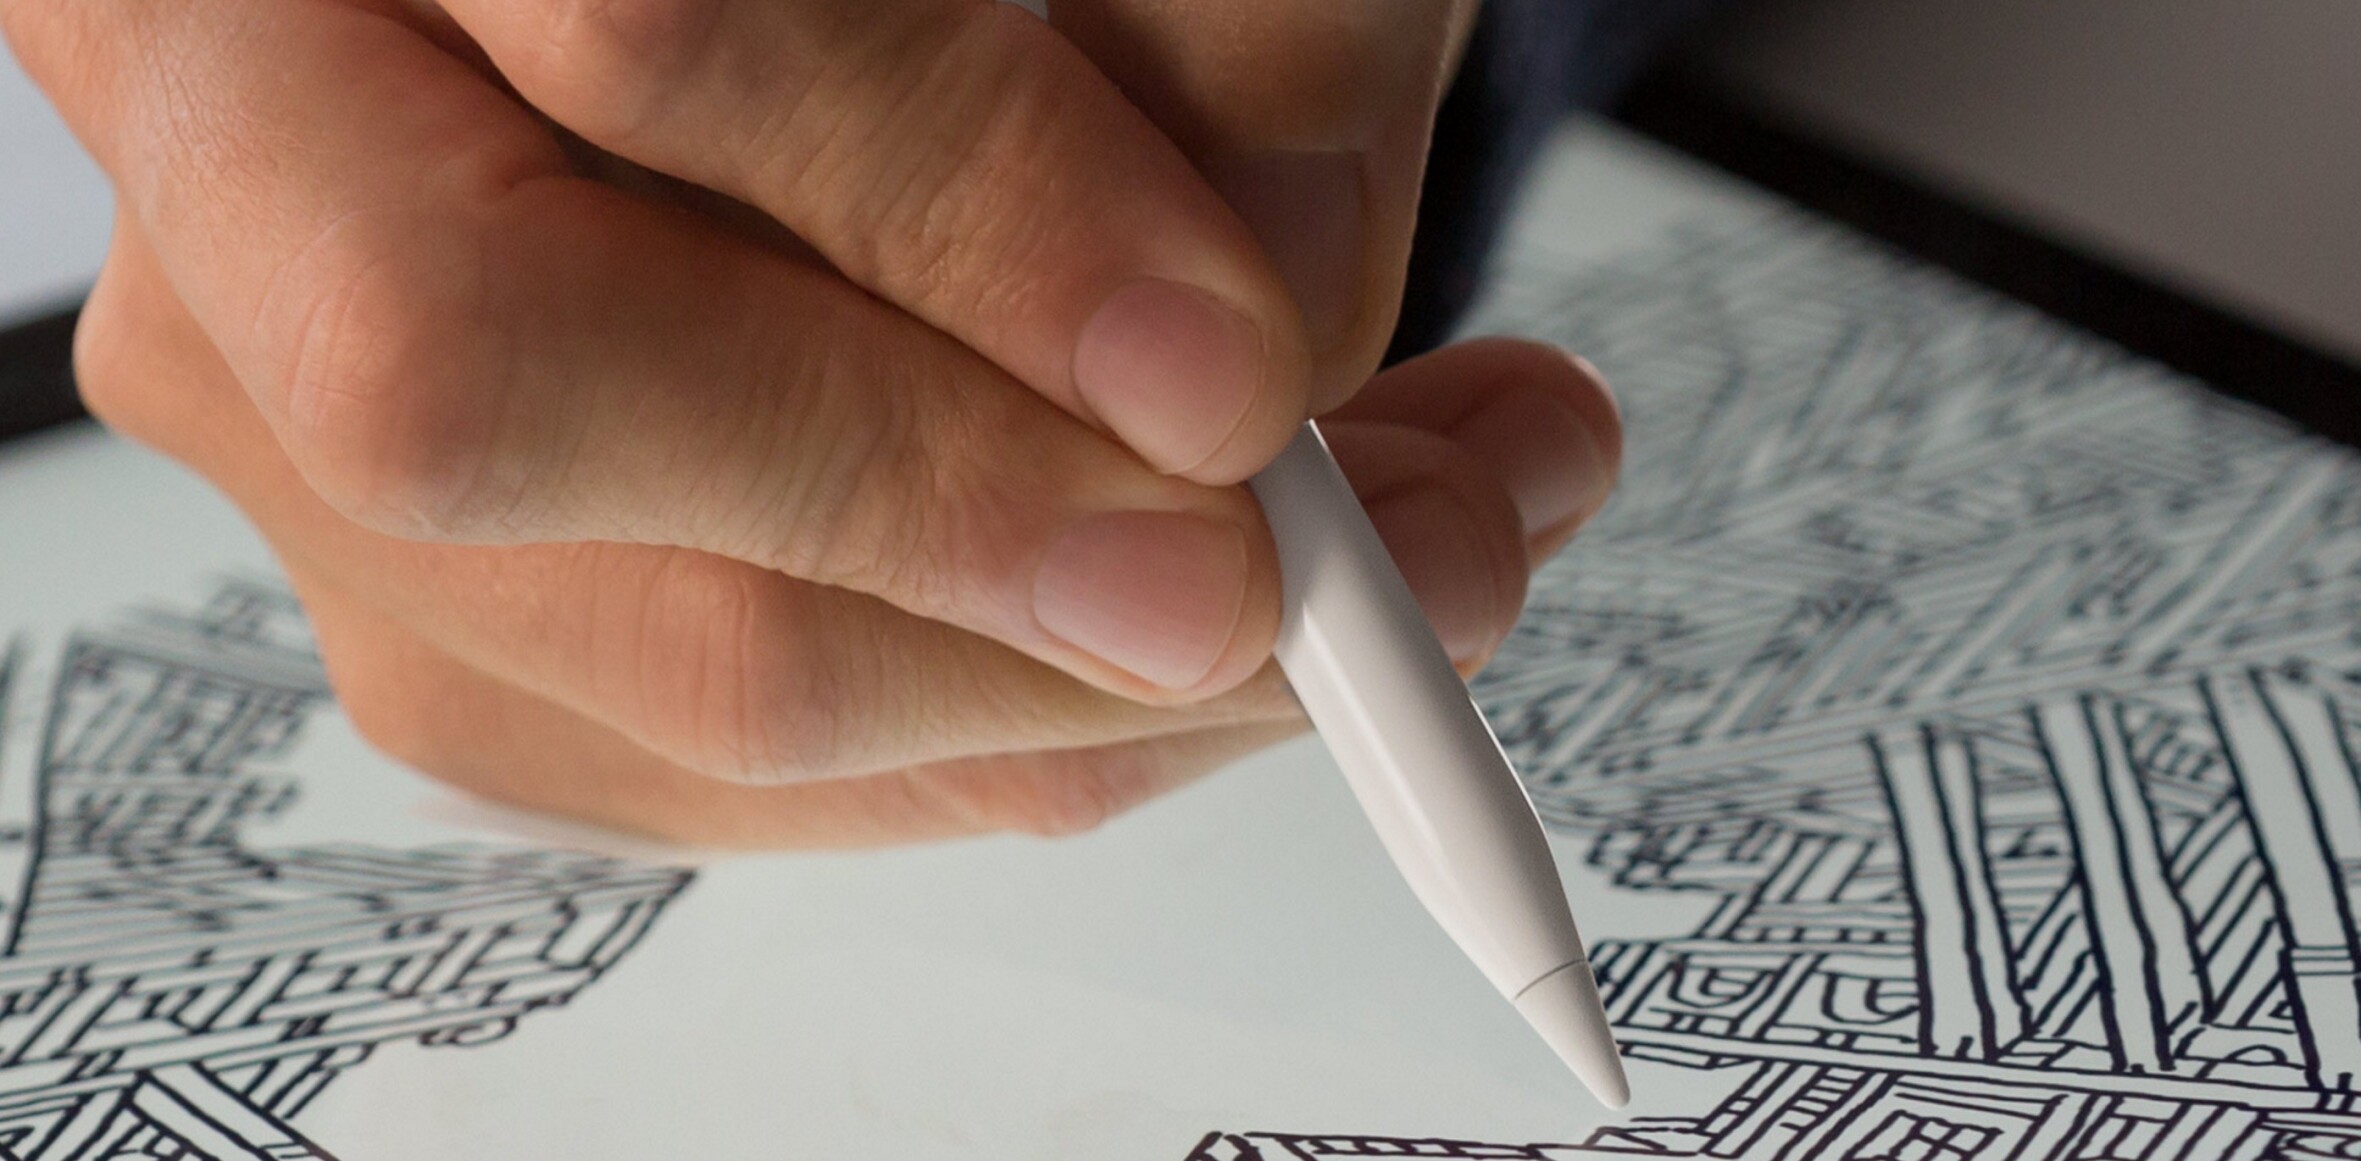 Apple didn’t “blow it” with the stylus, it did what was right